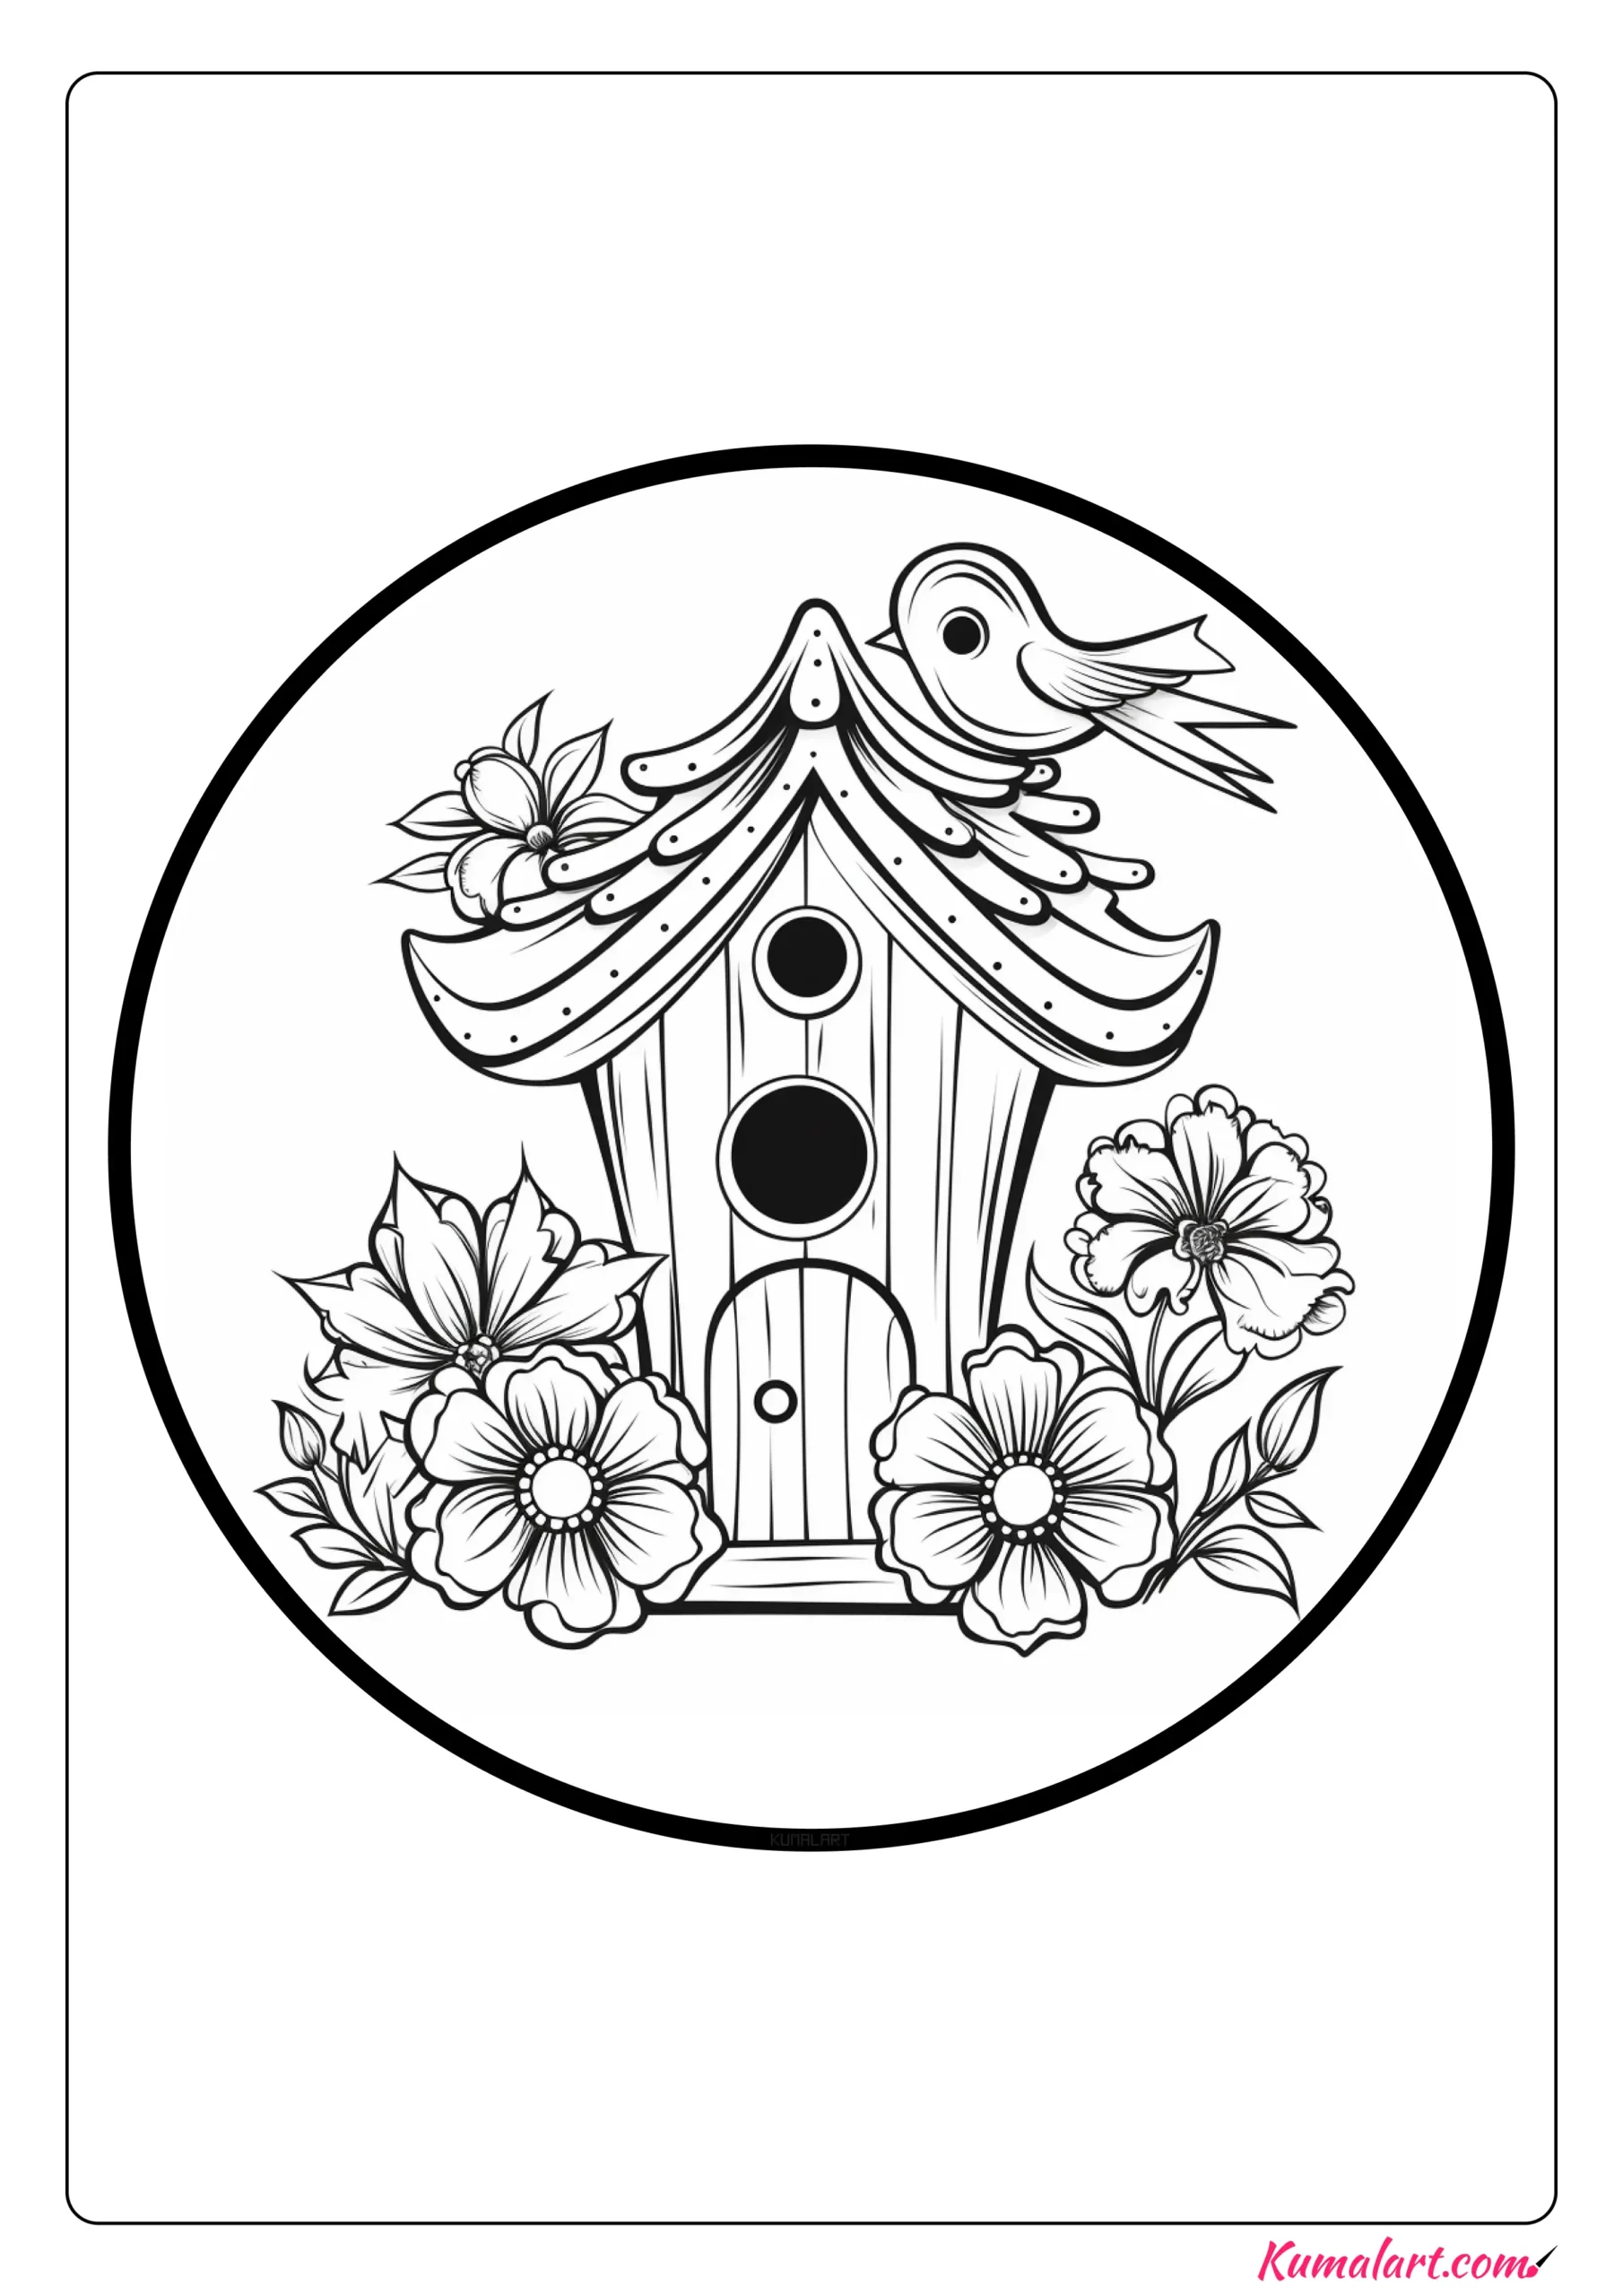 Gorgeous Birdhouse Coloring Page